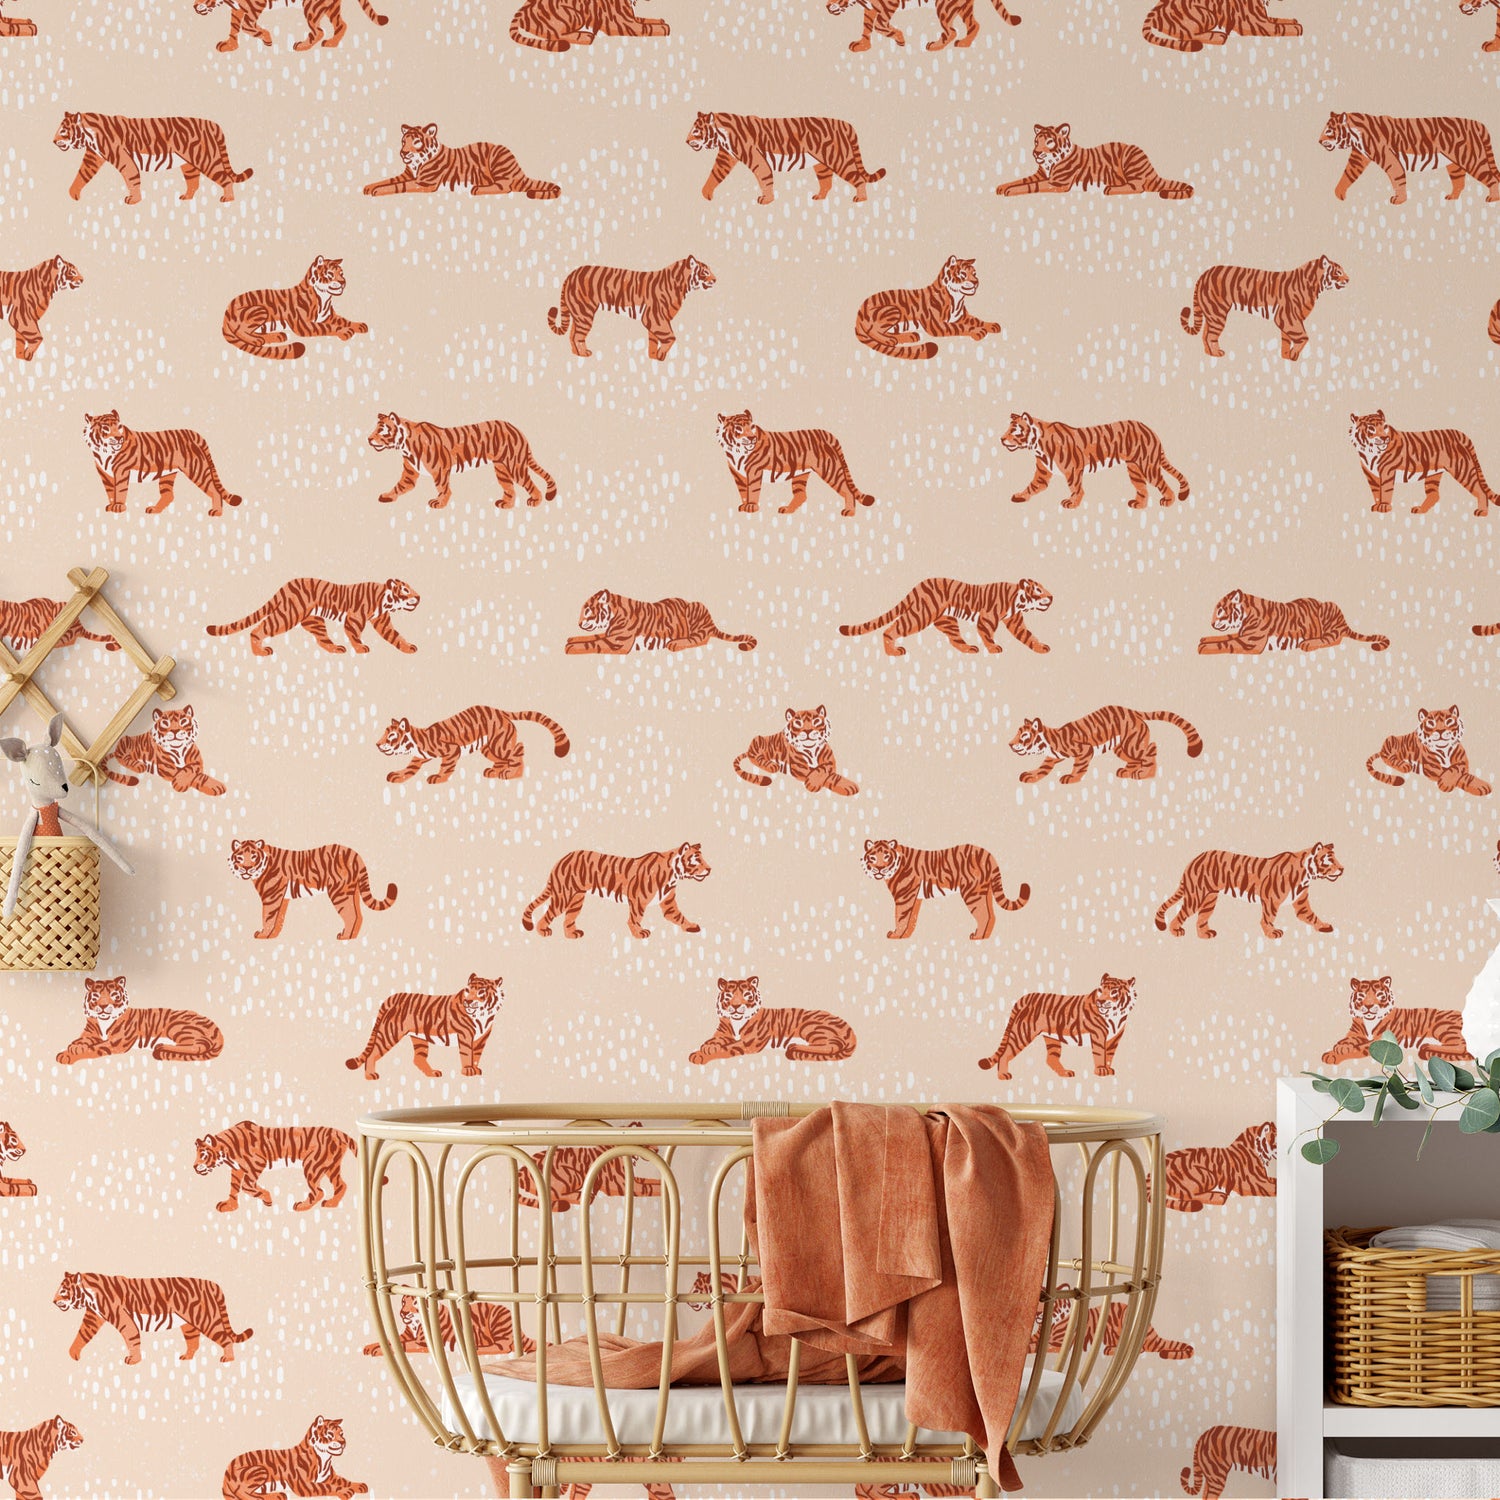 Mock up of Tiger Meadow- Tan and Orange Wallpaper perfect for a nursery or playroom space.